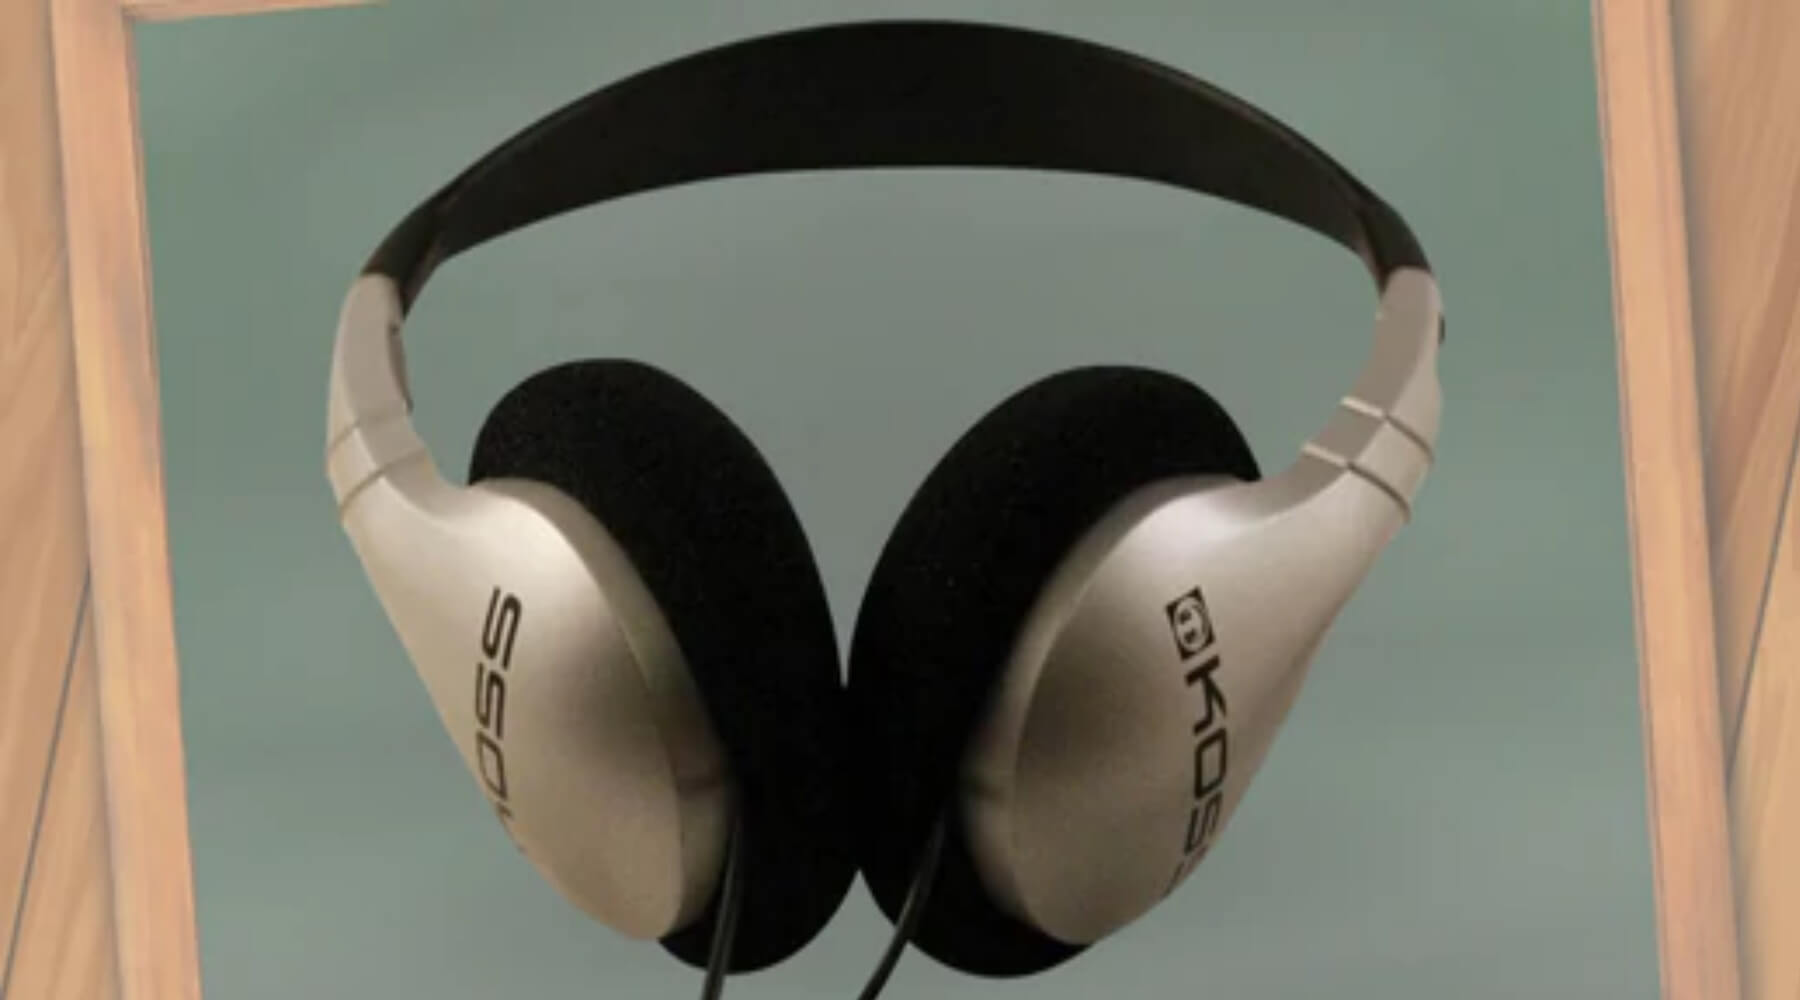 When you need affordable Koss UR5 School Headphones, Learning Headphones is your best bet.